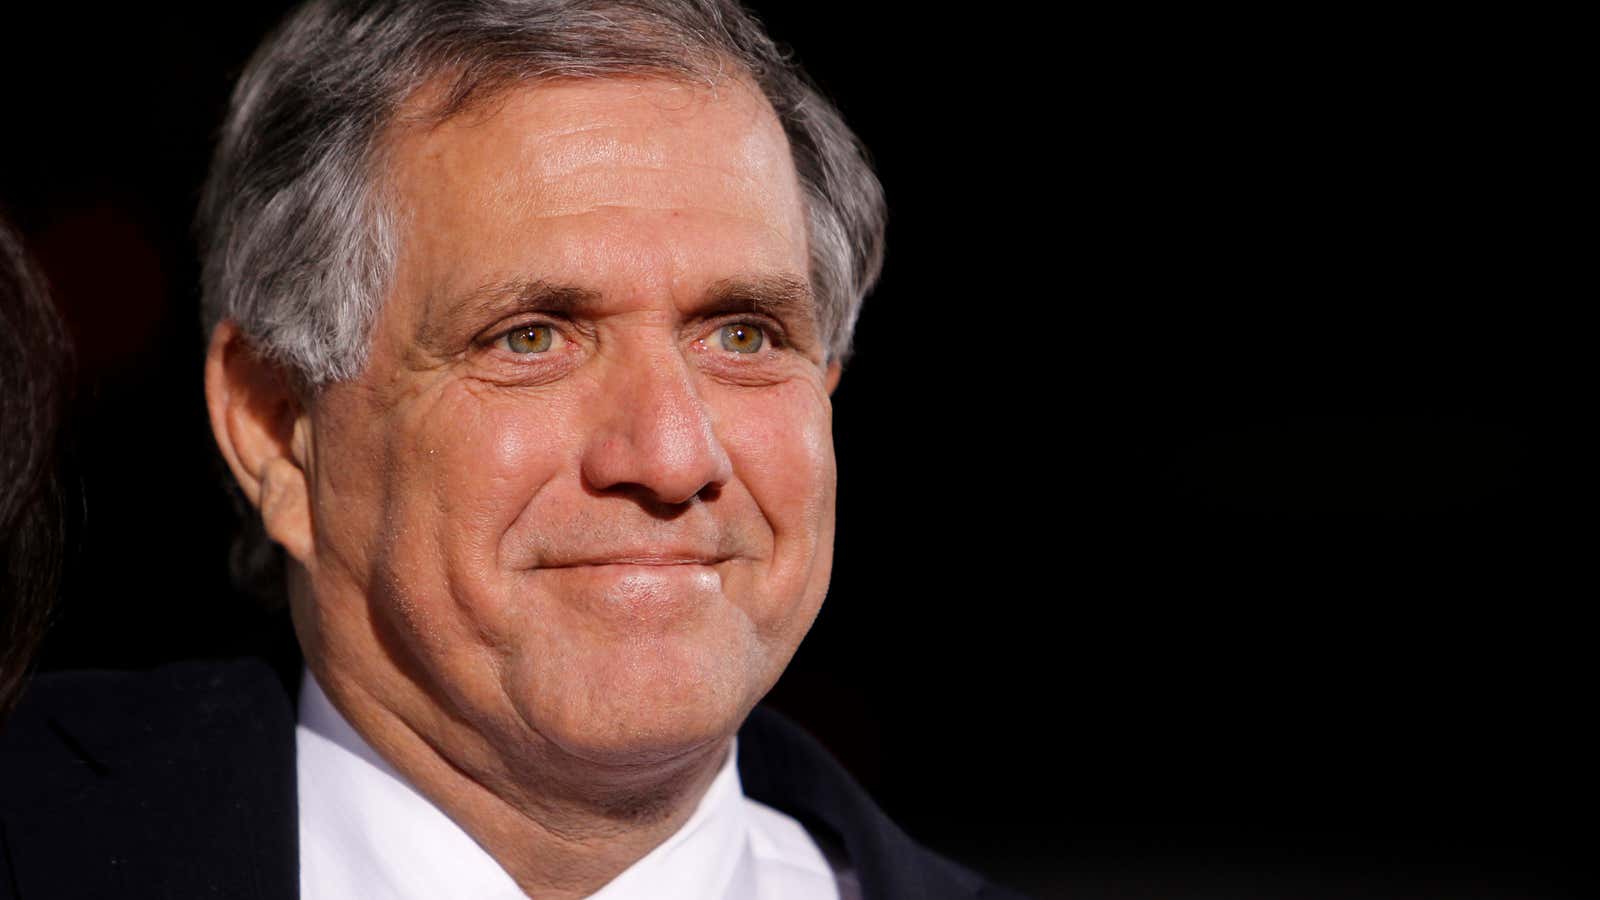 Moonves deleted hundreds of texts and handed investigators his son’s iPad instead of his own.